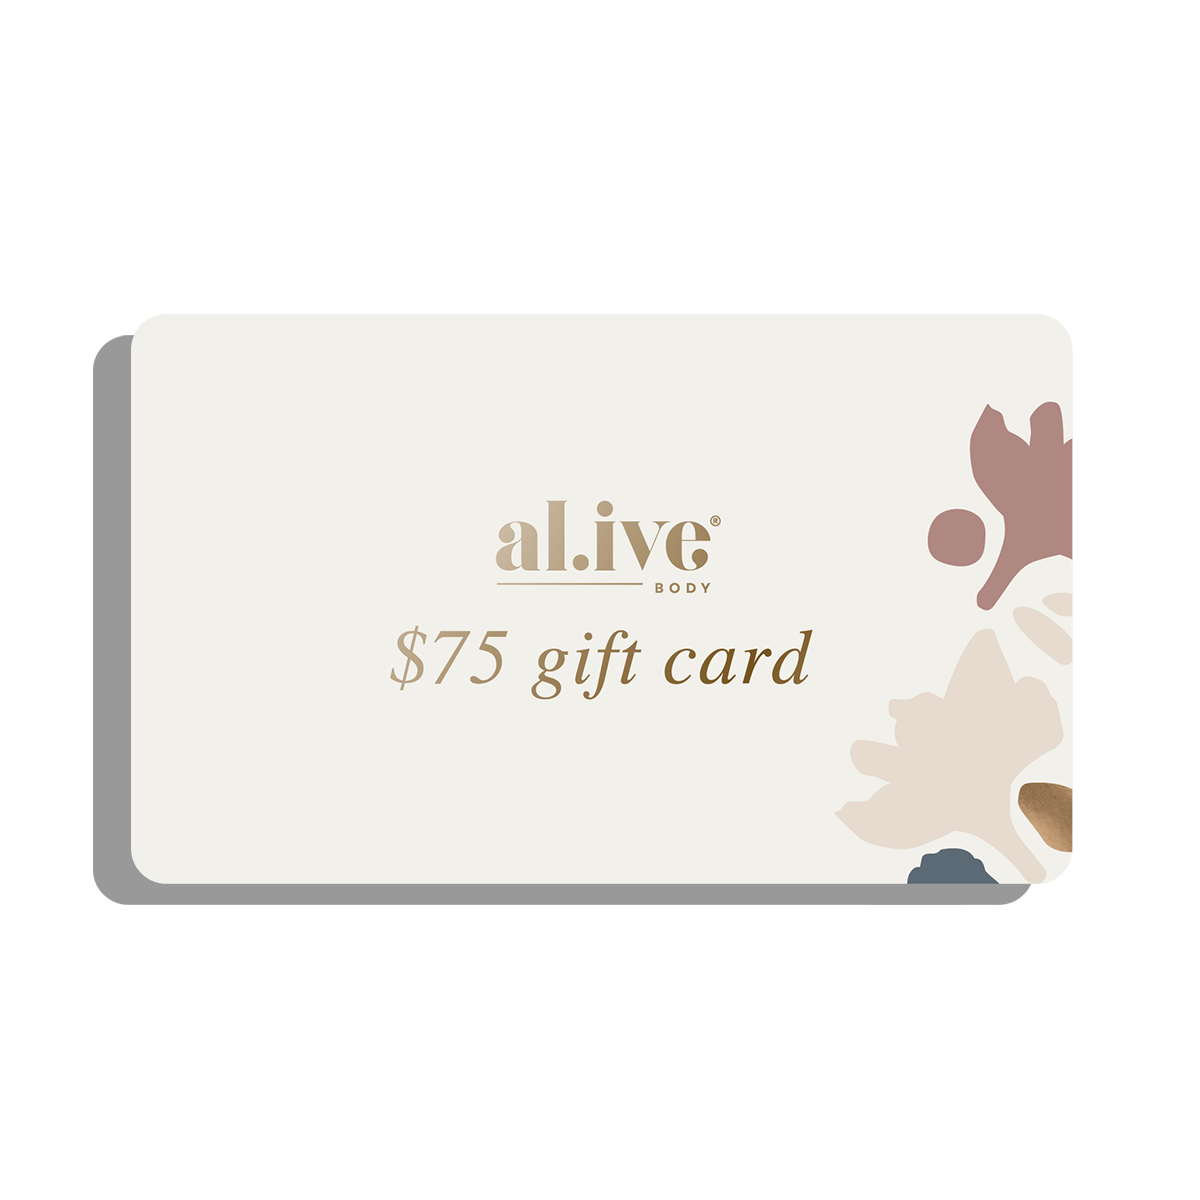 $75 HOLIDAY GIFT CARD - al.ive body